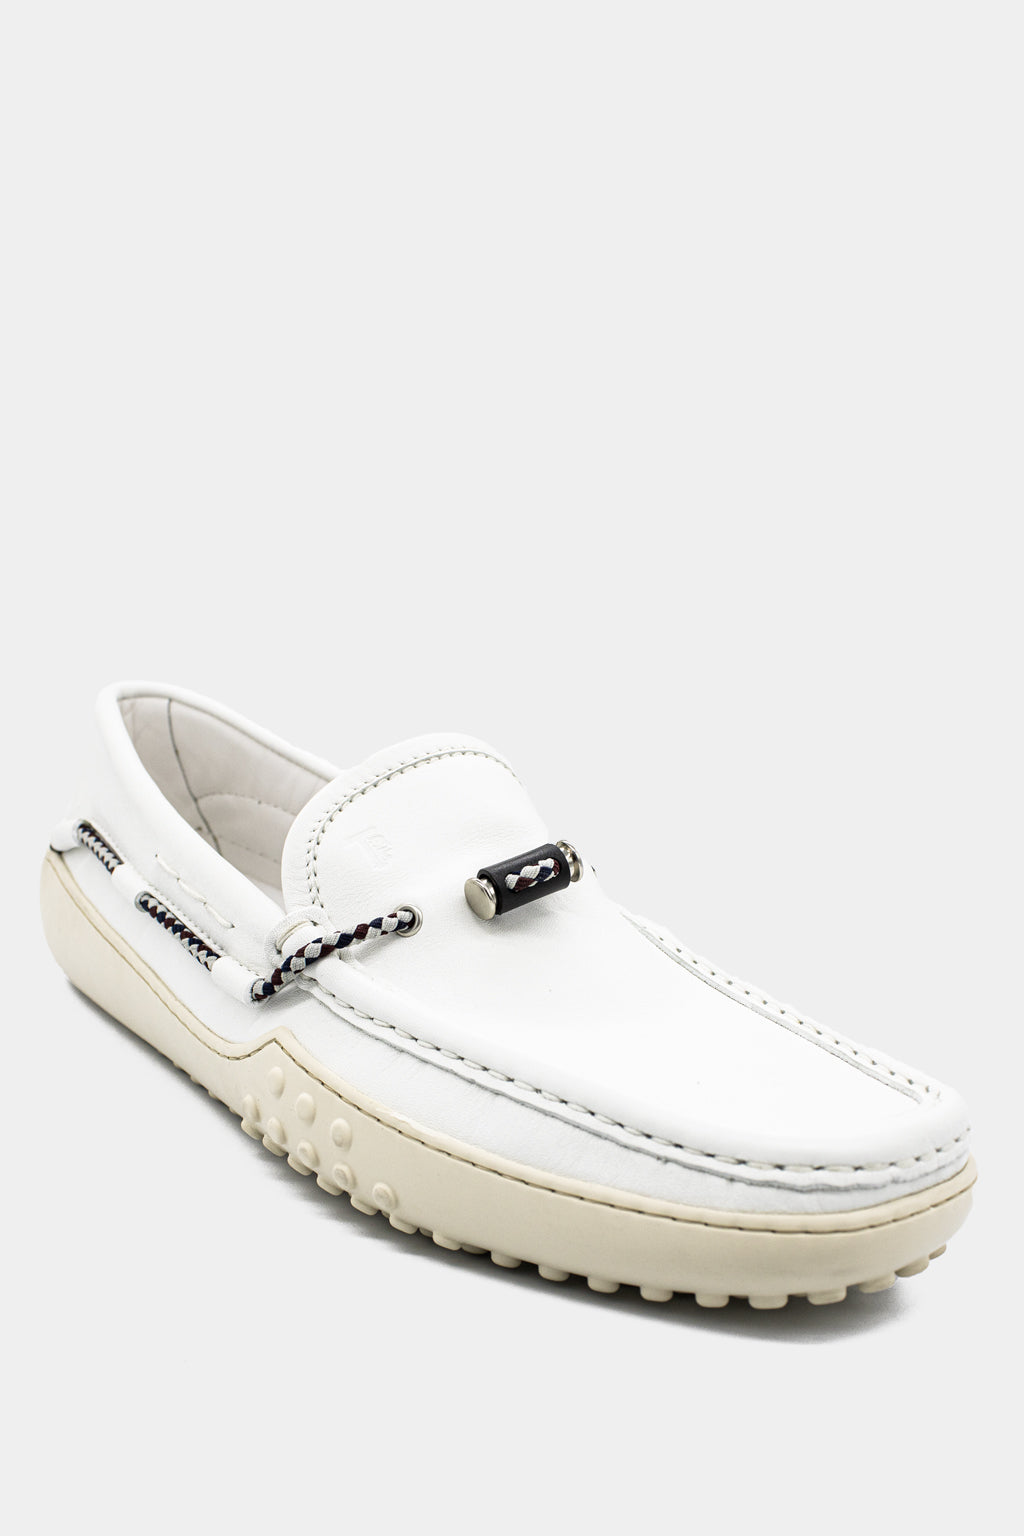 Tod's - Men's White Leather Gommino Loafers